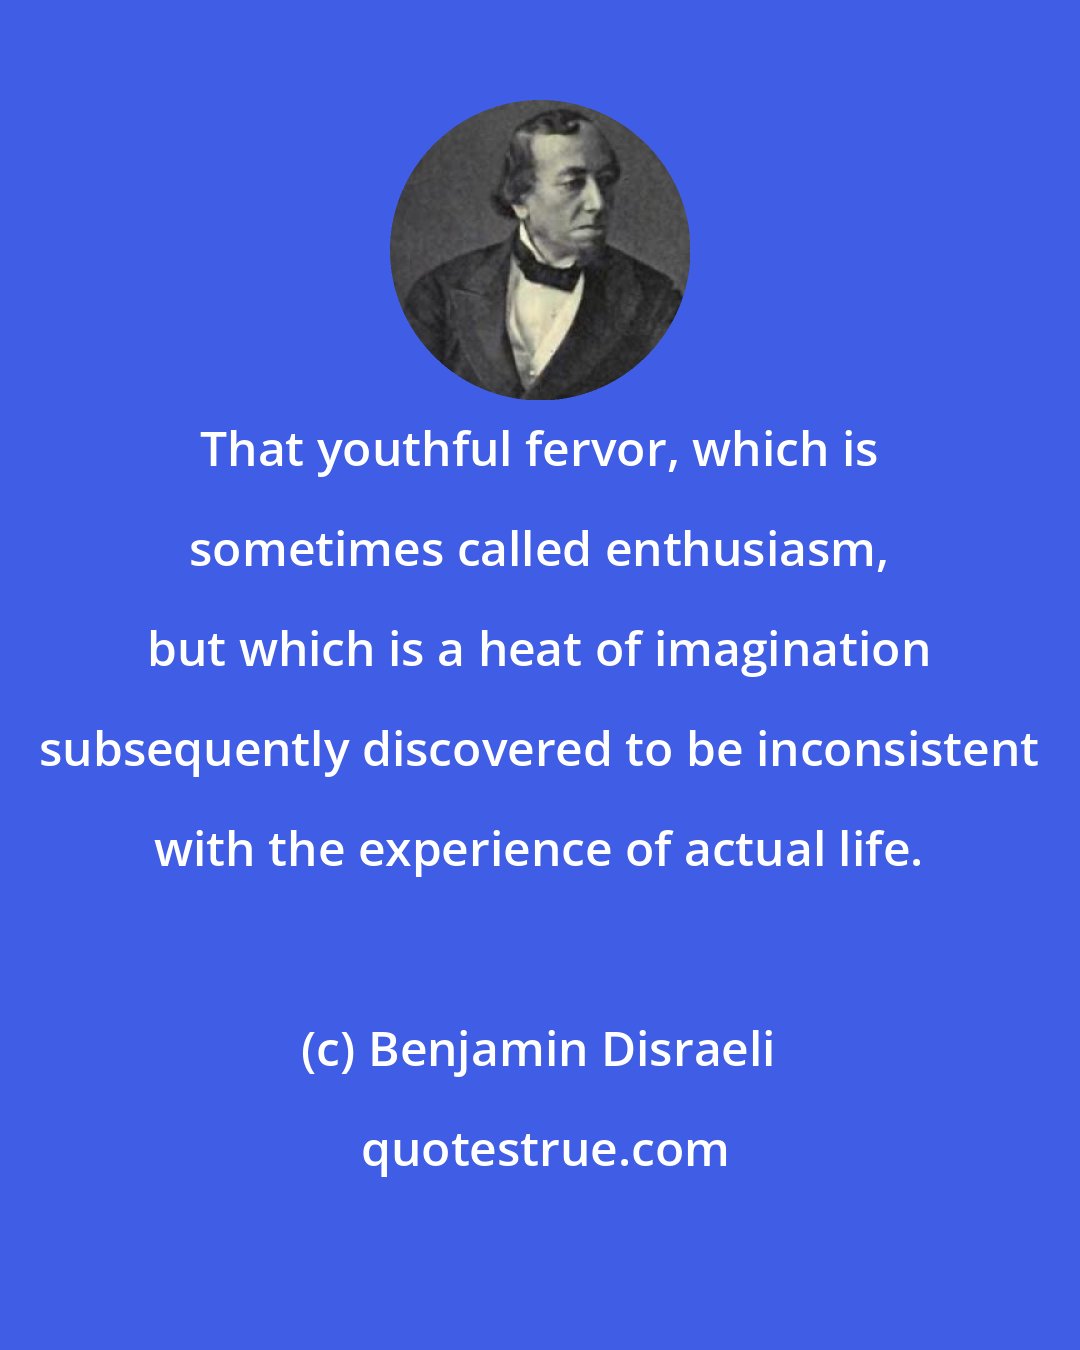 Benjamin Disraeli: That youthful fervor, which is sometimes called enthusiasm, but which is a heat of imagination subsequently discovered to be inconsistent with the experience of actual life.